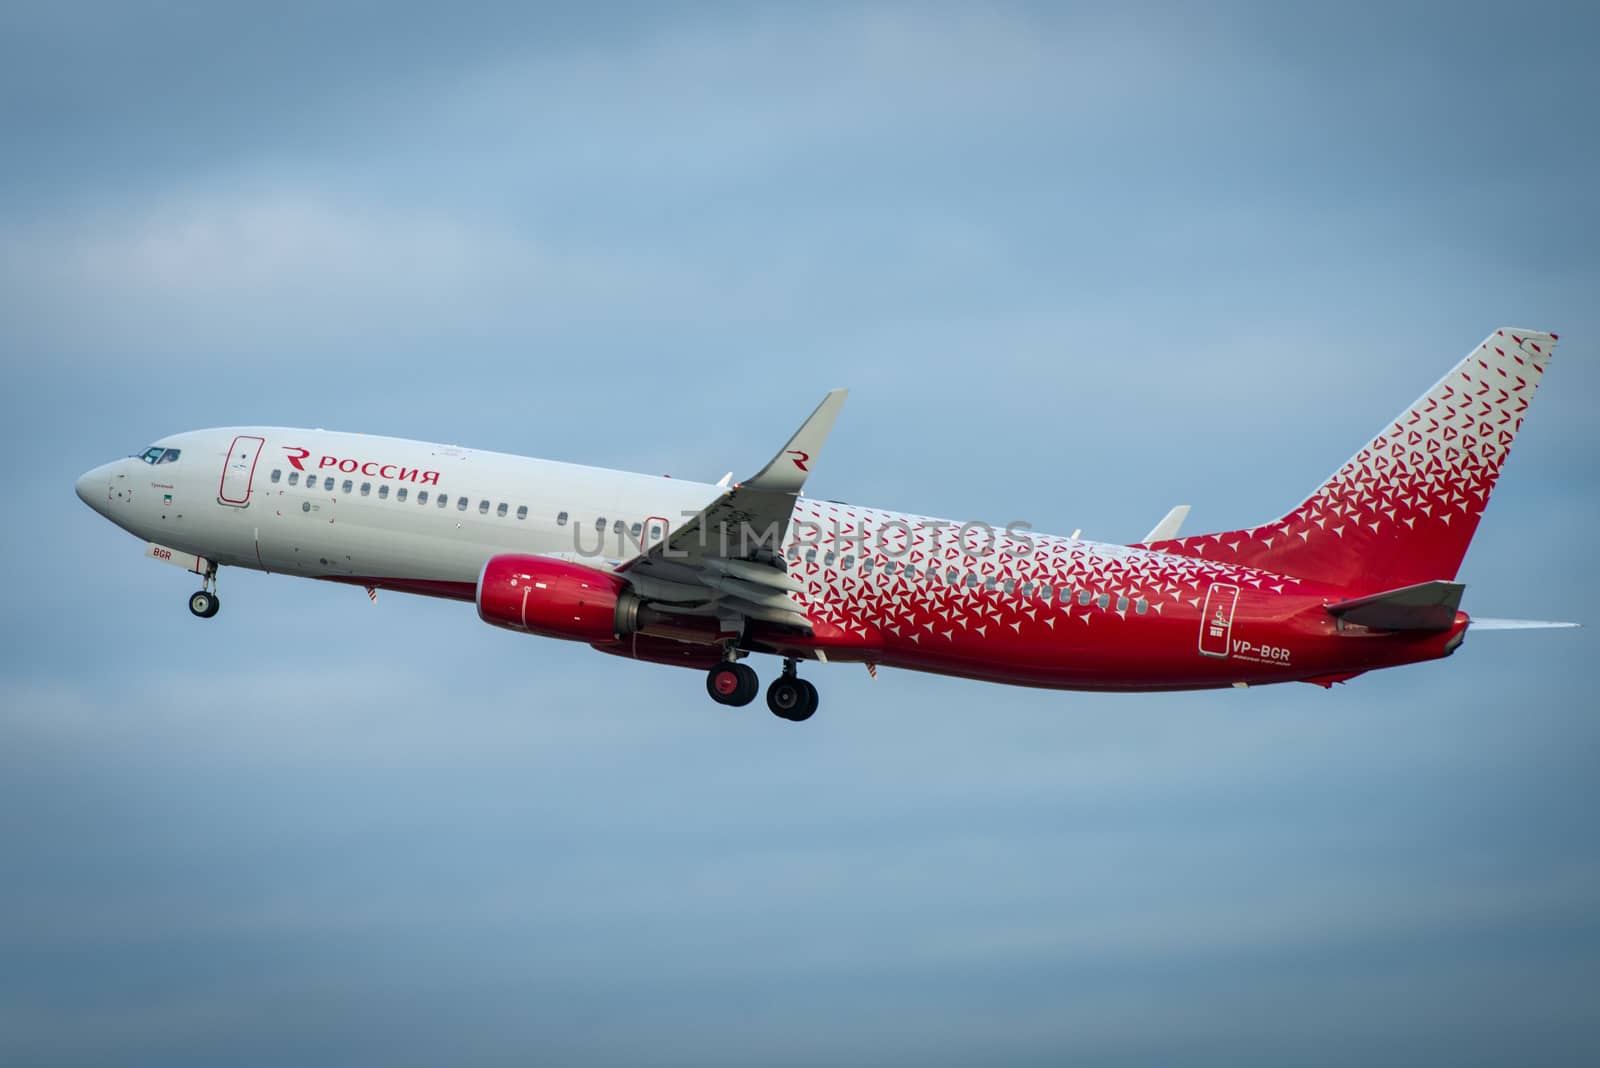 October 29, 2019, Moscow, Russia. Plane 
Boeing 737-800 Rossiya - Russian Airlines at Sheremetyevo airport in Moscow.